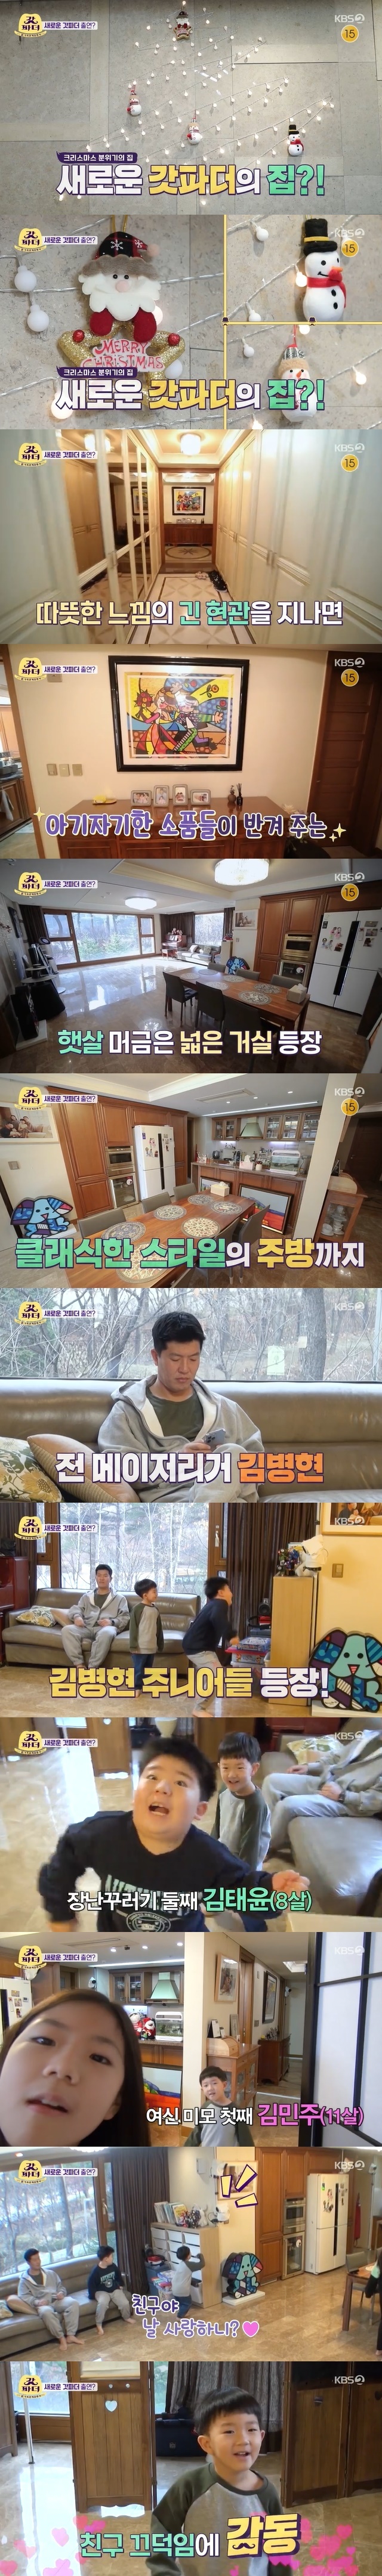 A luxury part of former major leaguer Kim Byung-hyun with an annual salary of 23.7 billion has unveiled his home.In the 13th KBS 2TV entertainment The New Family Relationship Certificate The Last Godfather (hereinafter The Last Godfather) broadcast on December 29, Hur Jae and Lee Soon Jae visited Kim Byung-hyuns house.Kim Byung-hyuns junior 5-year-old youngest Jusung-gun, 8-year-old second Taeyun-gun, and 11-year-old Min-Ju were also noticeable.In particular, Jusung called the camera Friend and caught the eye with a cute figure asking, Is it Friend, do you love me?